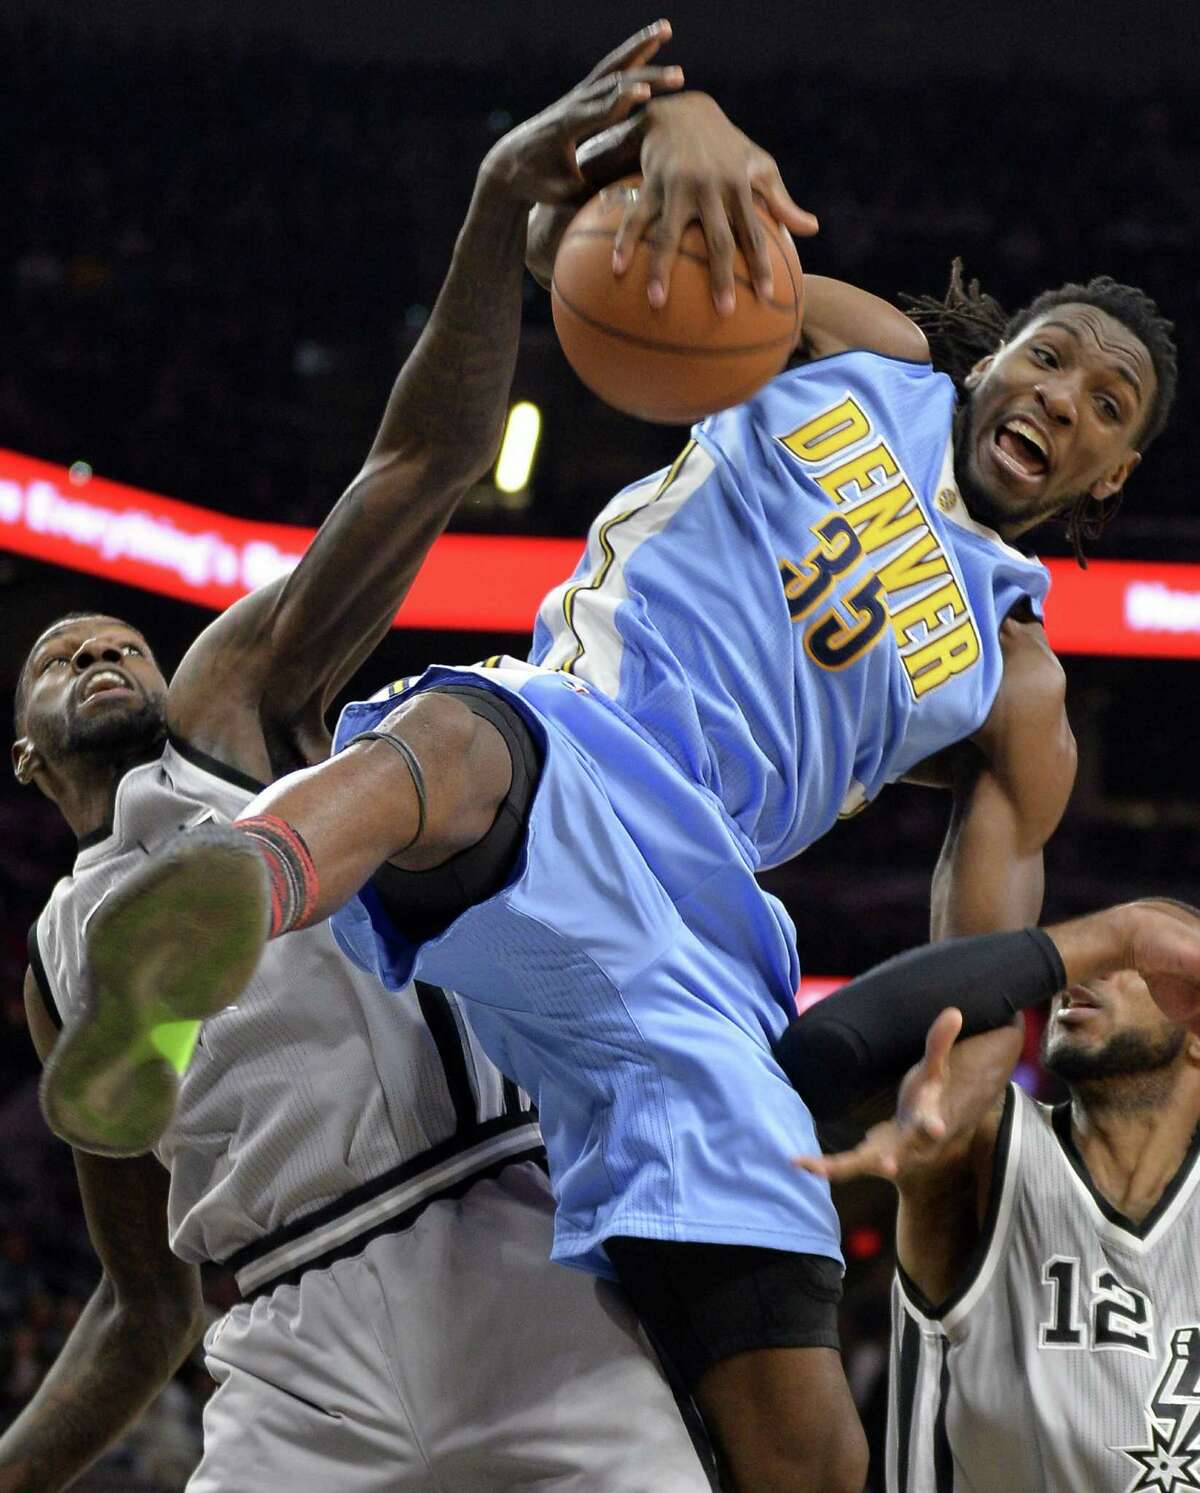 Denver Nuggets forward Kenneth Faried (35) falls as he jumps for the rebound against the Spurs’ Dewayne Dedmon during the first half on Feb. 4, 2017, in San Antonio.